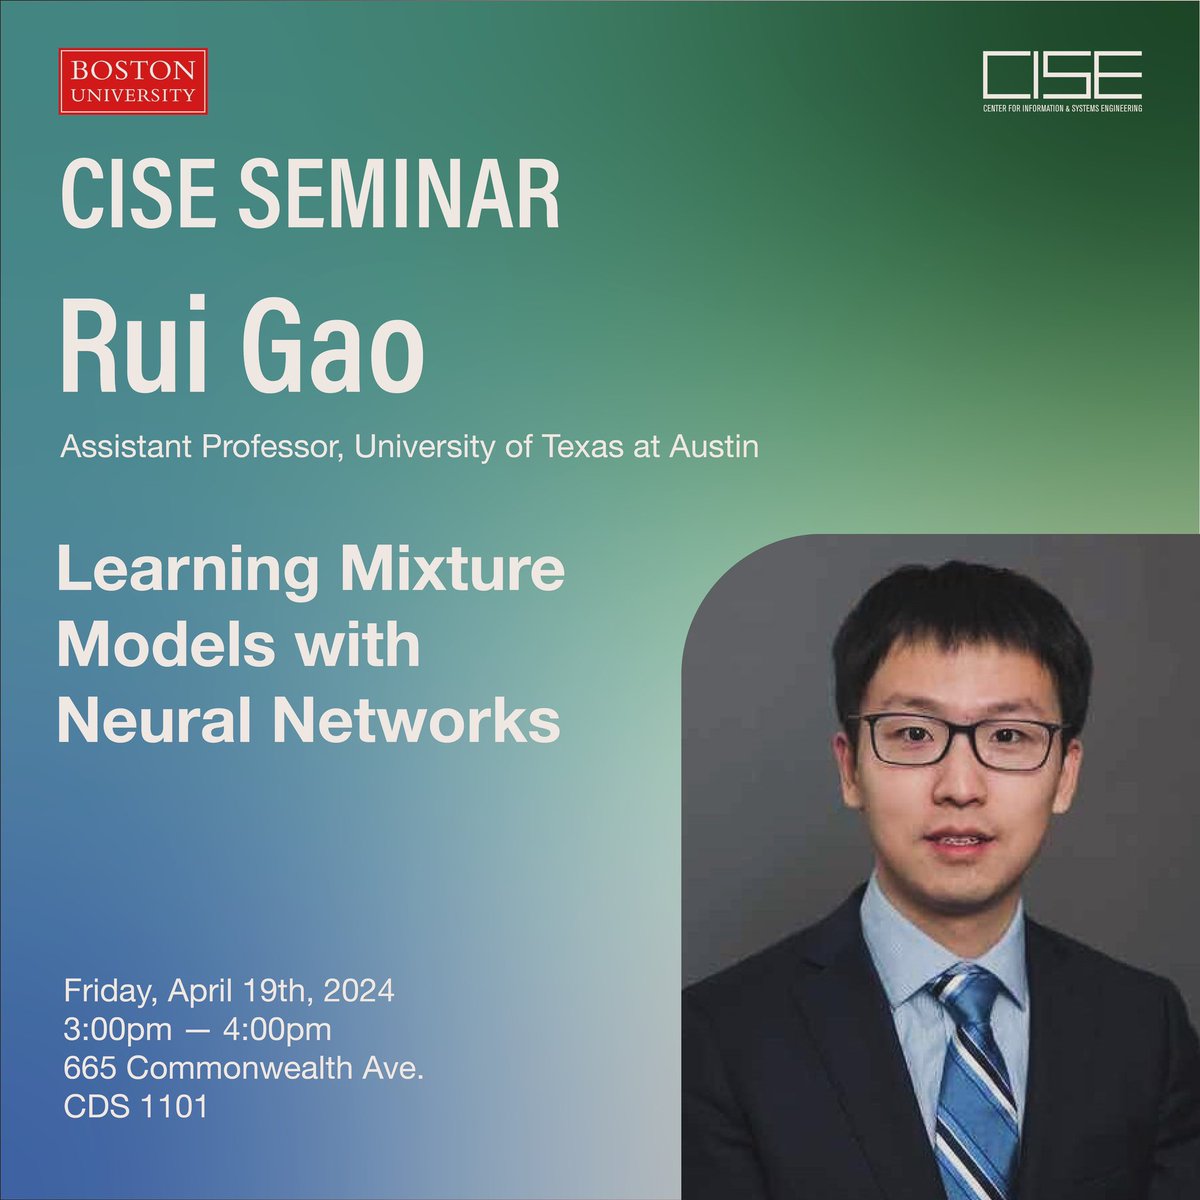 Join us this Friday to hear Rui Gao's CISE Seminar at CDS 1101 from 3-4PM! Read the abstract here: bu.edu/cise/cise-semi…